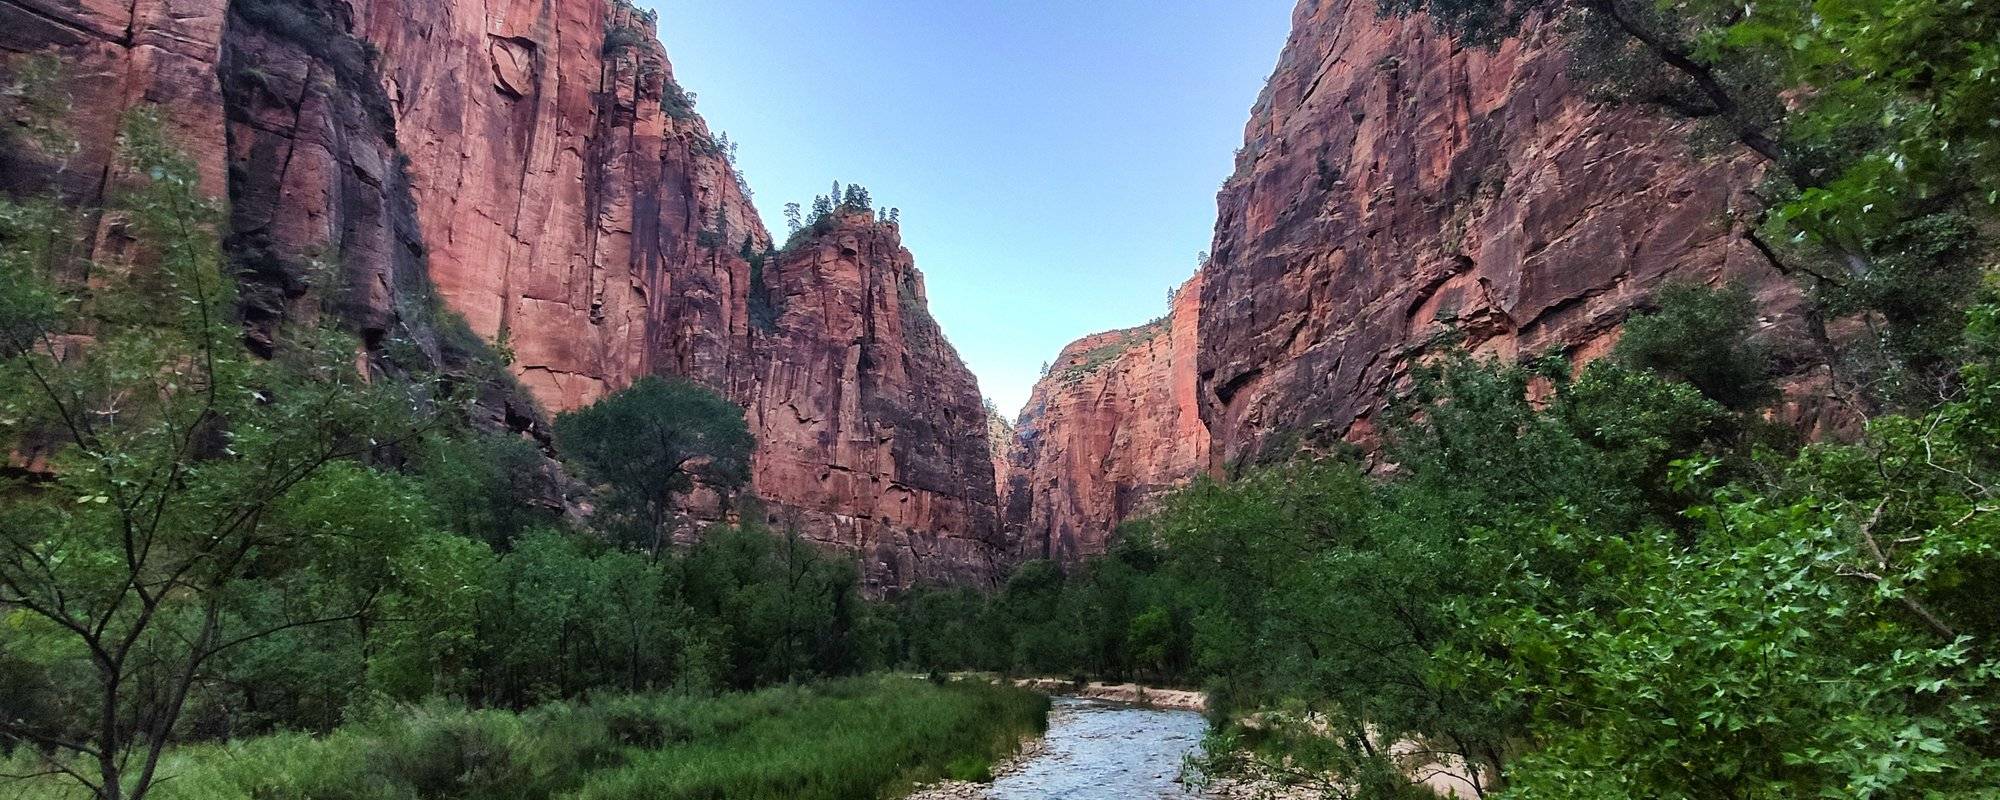 Zion Canyon: Ice cold feet in narrow waters